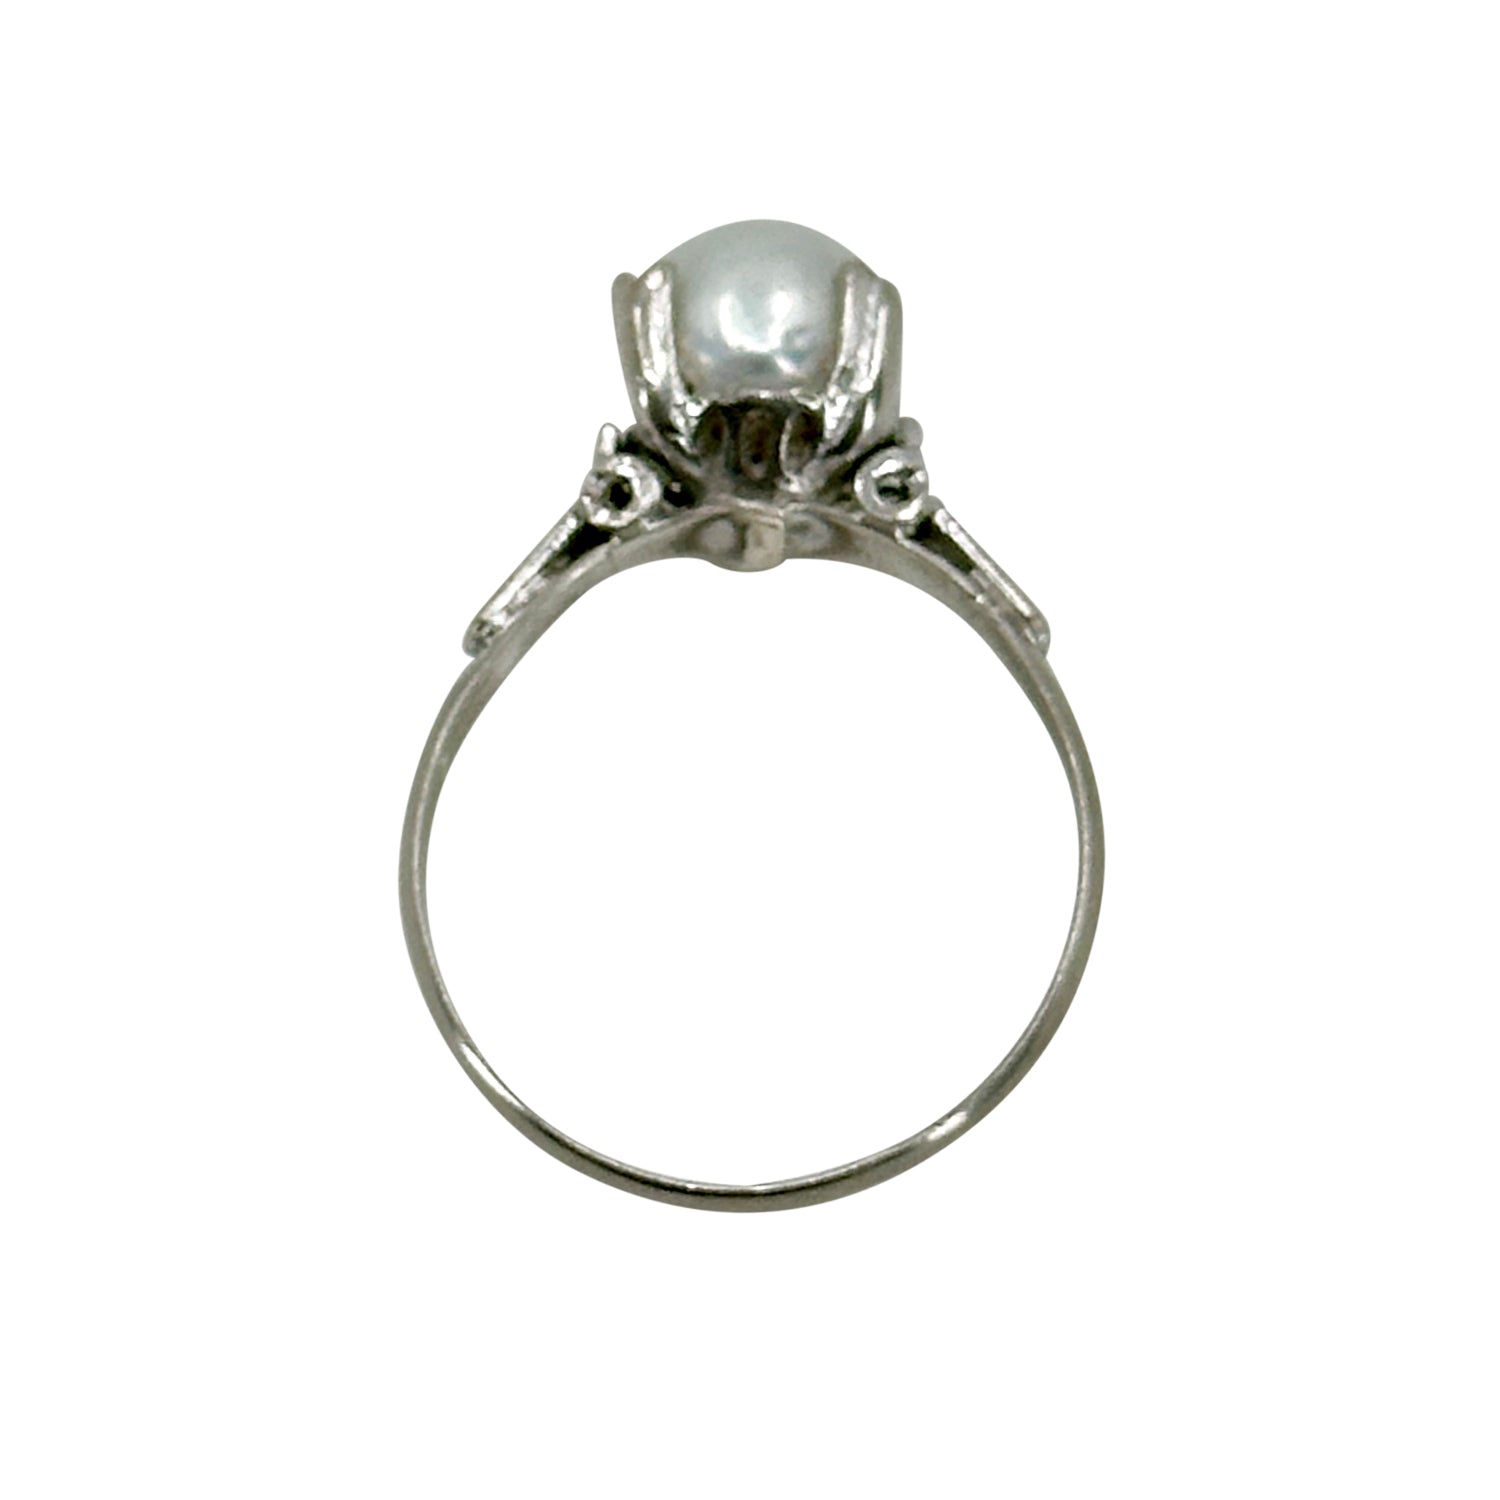 Light Gray Retro Japanese Saltwater Akoya Cultured Pearl Solitaire Ring- Sterling Silver Sz 6